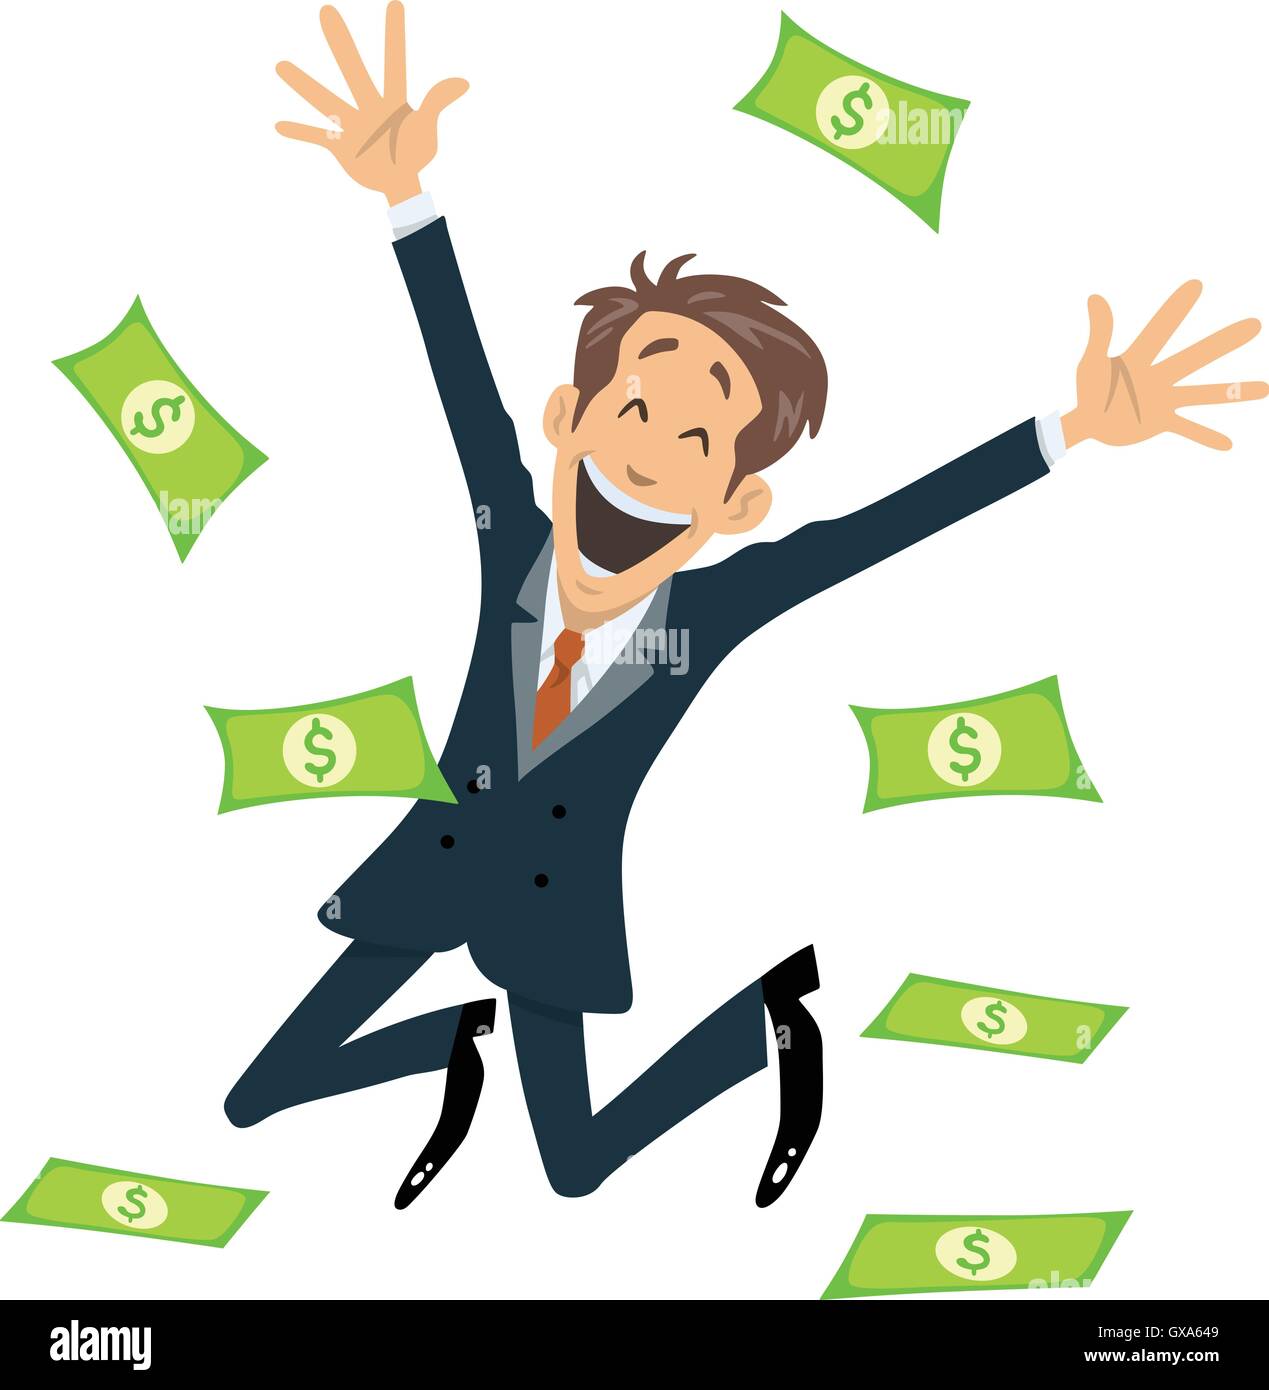 Successful Businessman Smiling And Jumping With Money Fly Away Vector Stock Vector